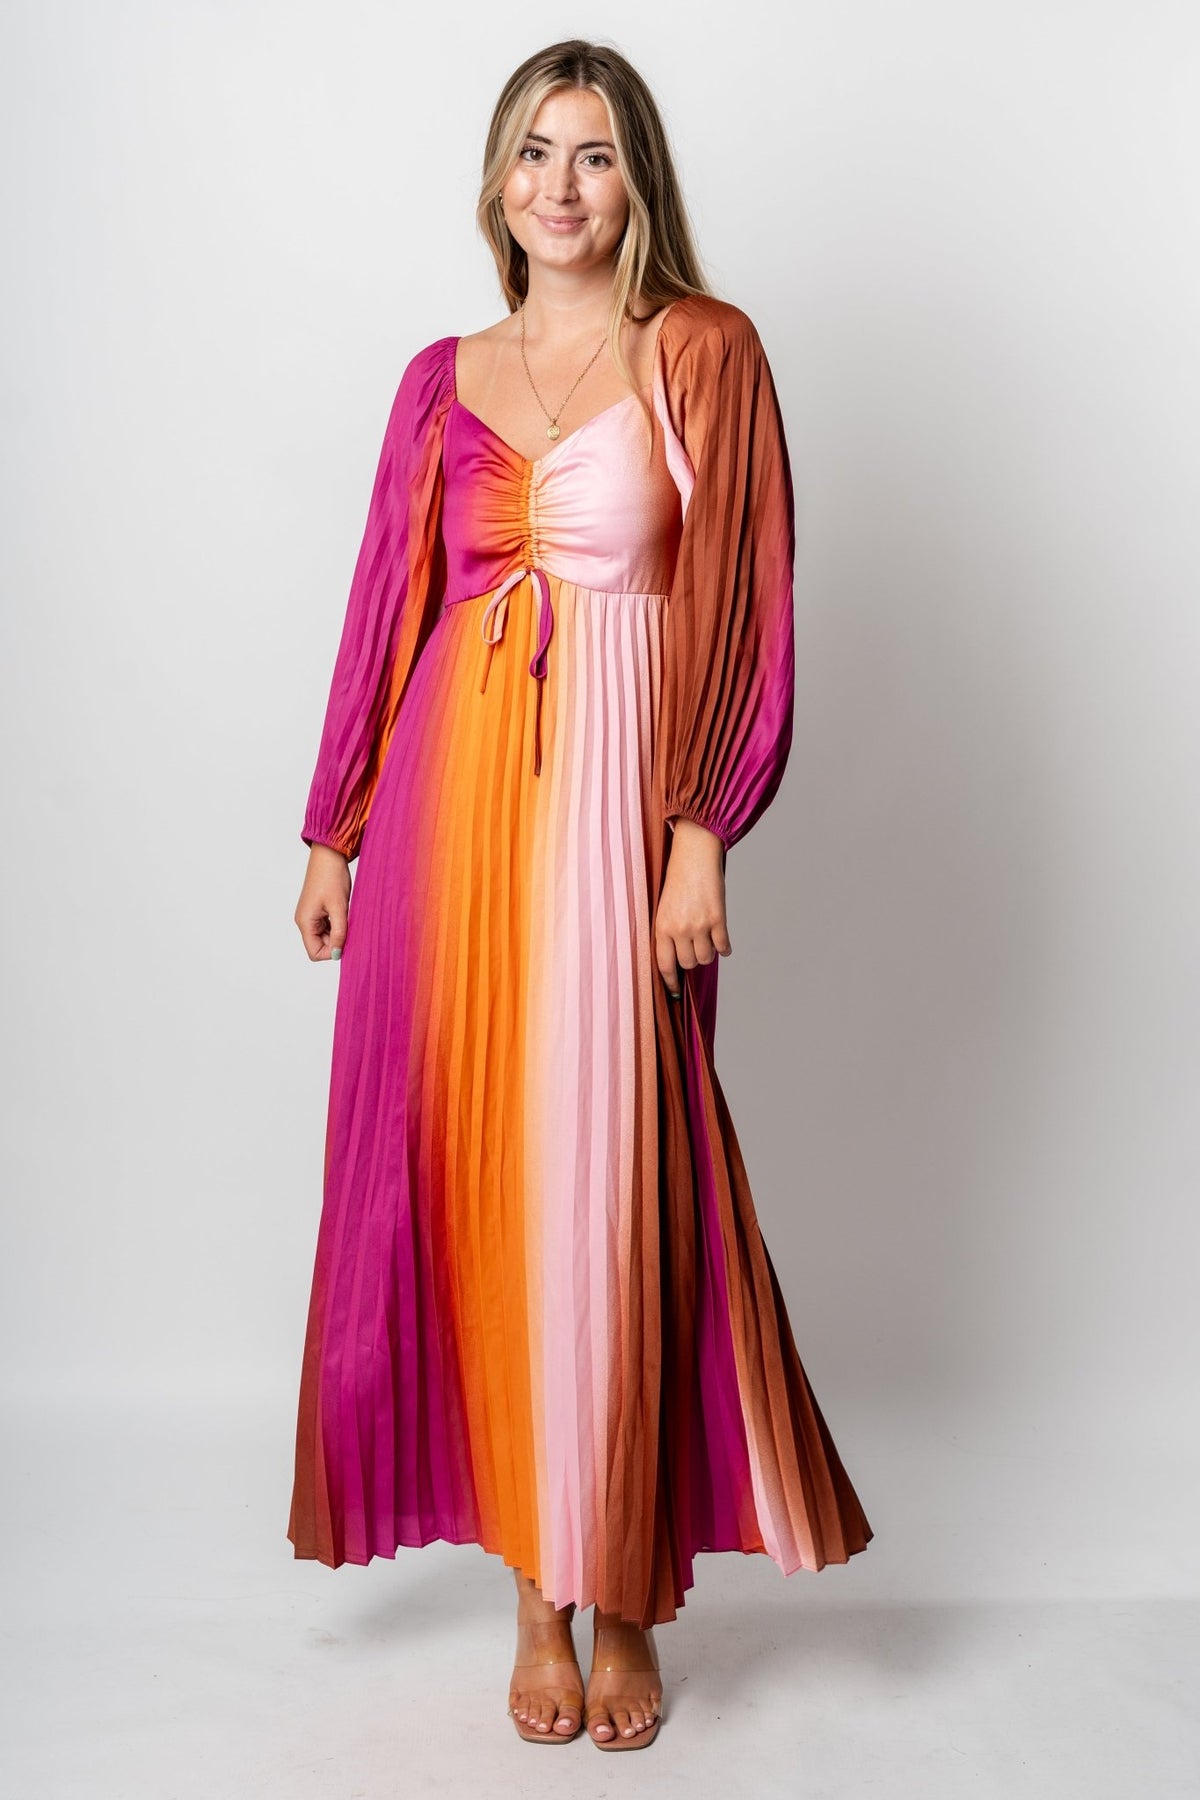 Pleated maxi dress mango orchid - Cute Dresses - Trendy Dresses at Lush Fashion Lounge Boutique in Oklahoma City